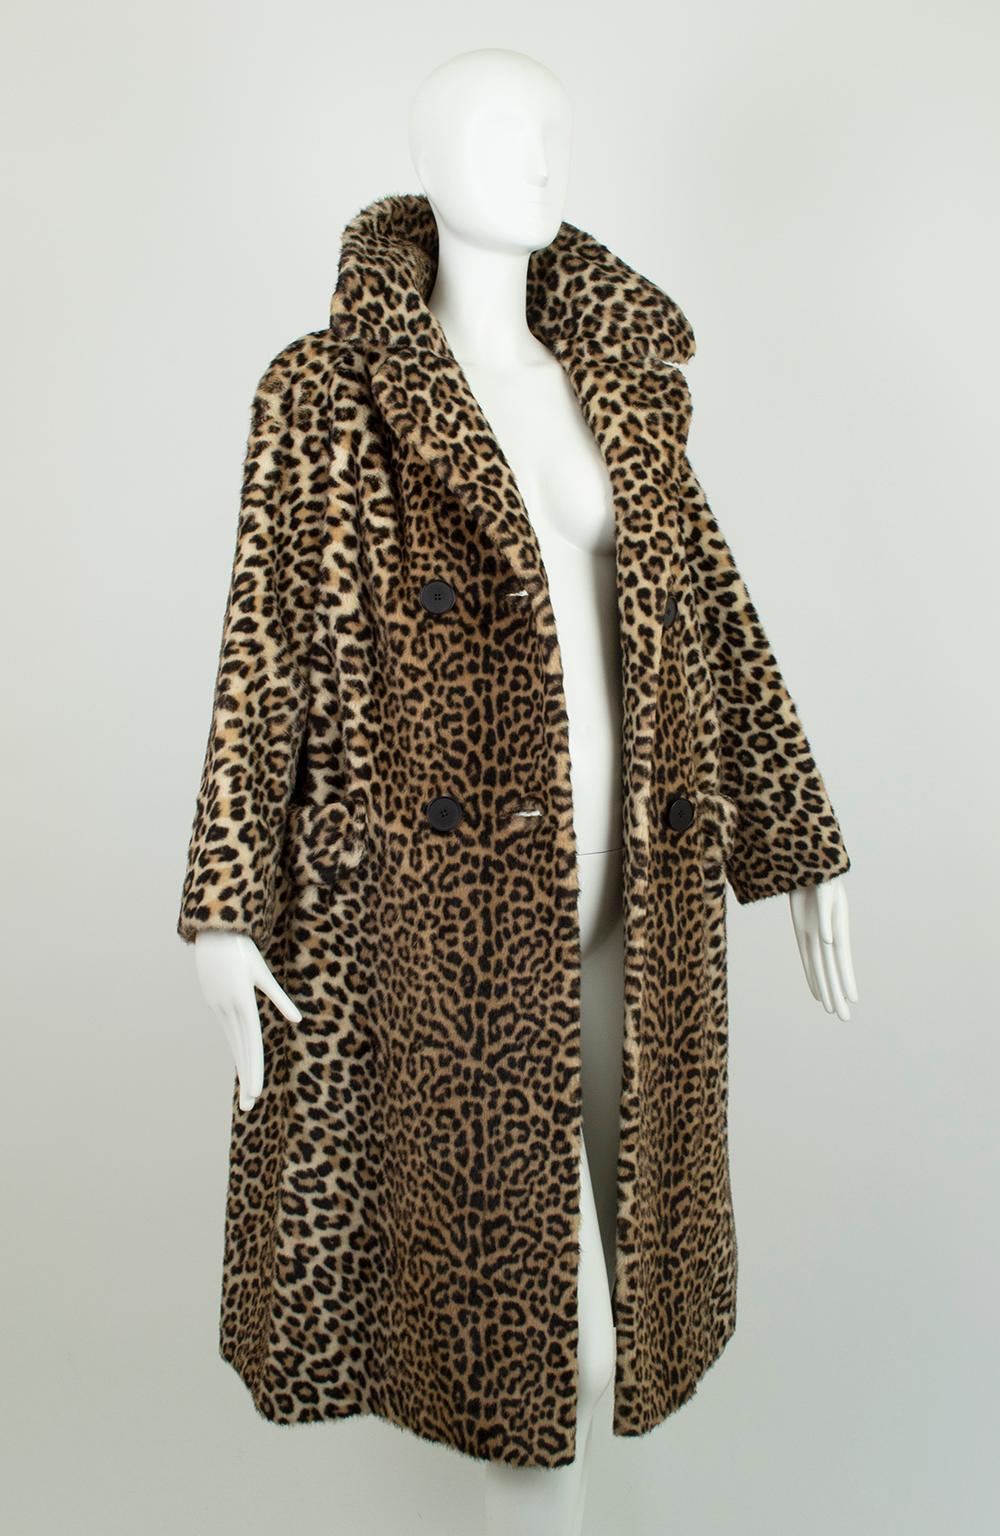 A far cry from the coarse economy faux furs of today, this chic vintage model comes as close to looking and feeling like the real thing as we’ve ever seen (and we have several real leopards against which to compare!). Beautifully printed, it